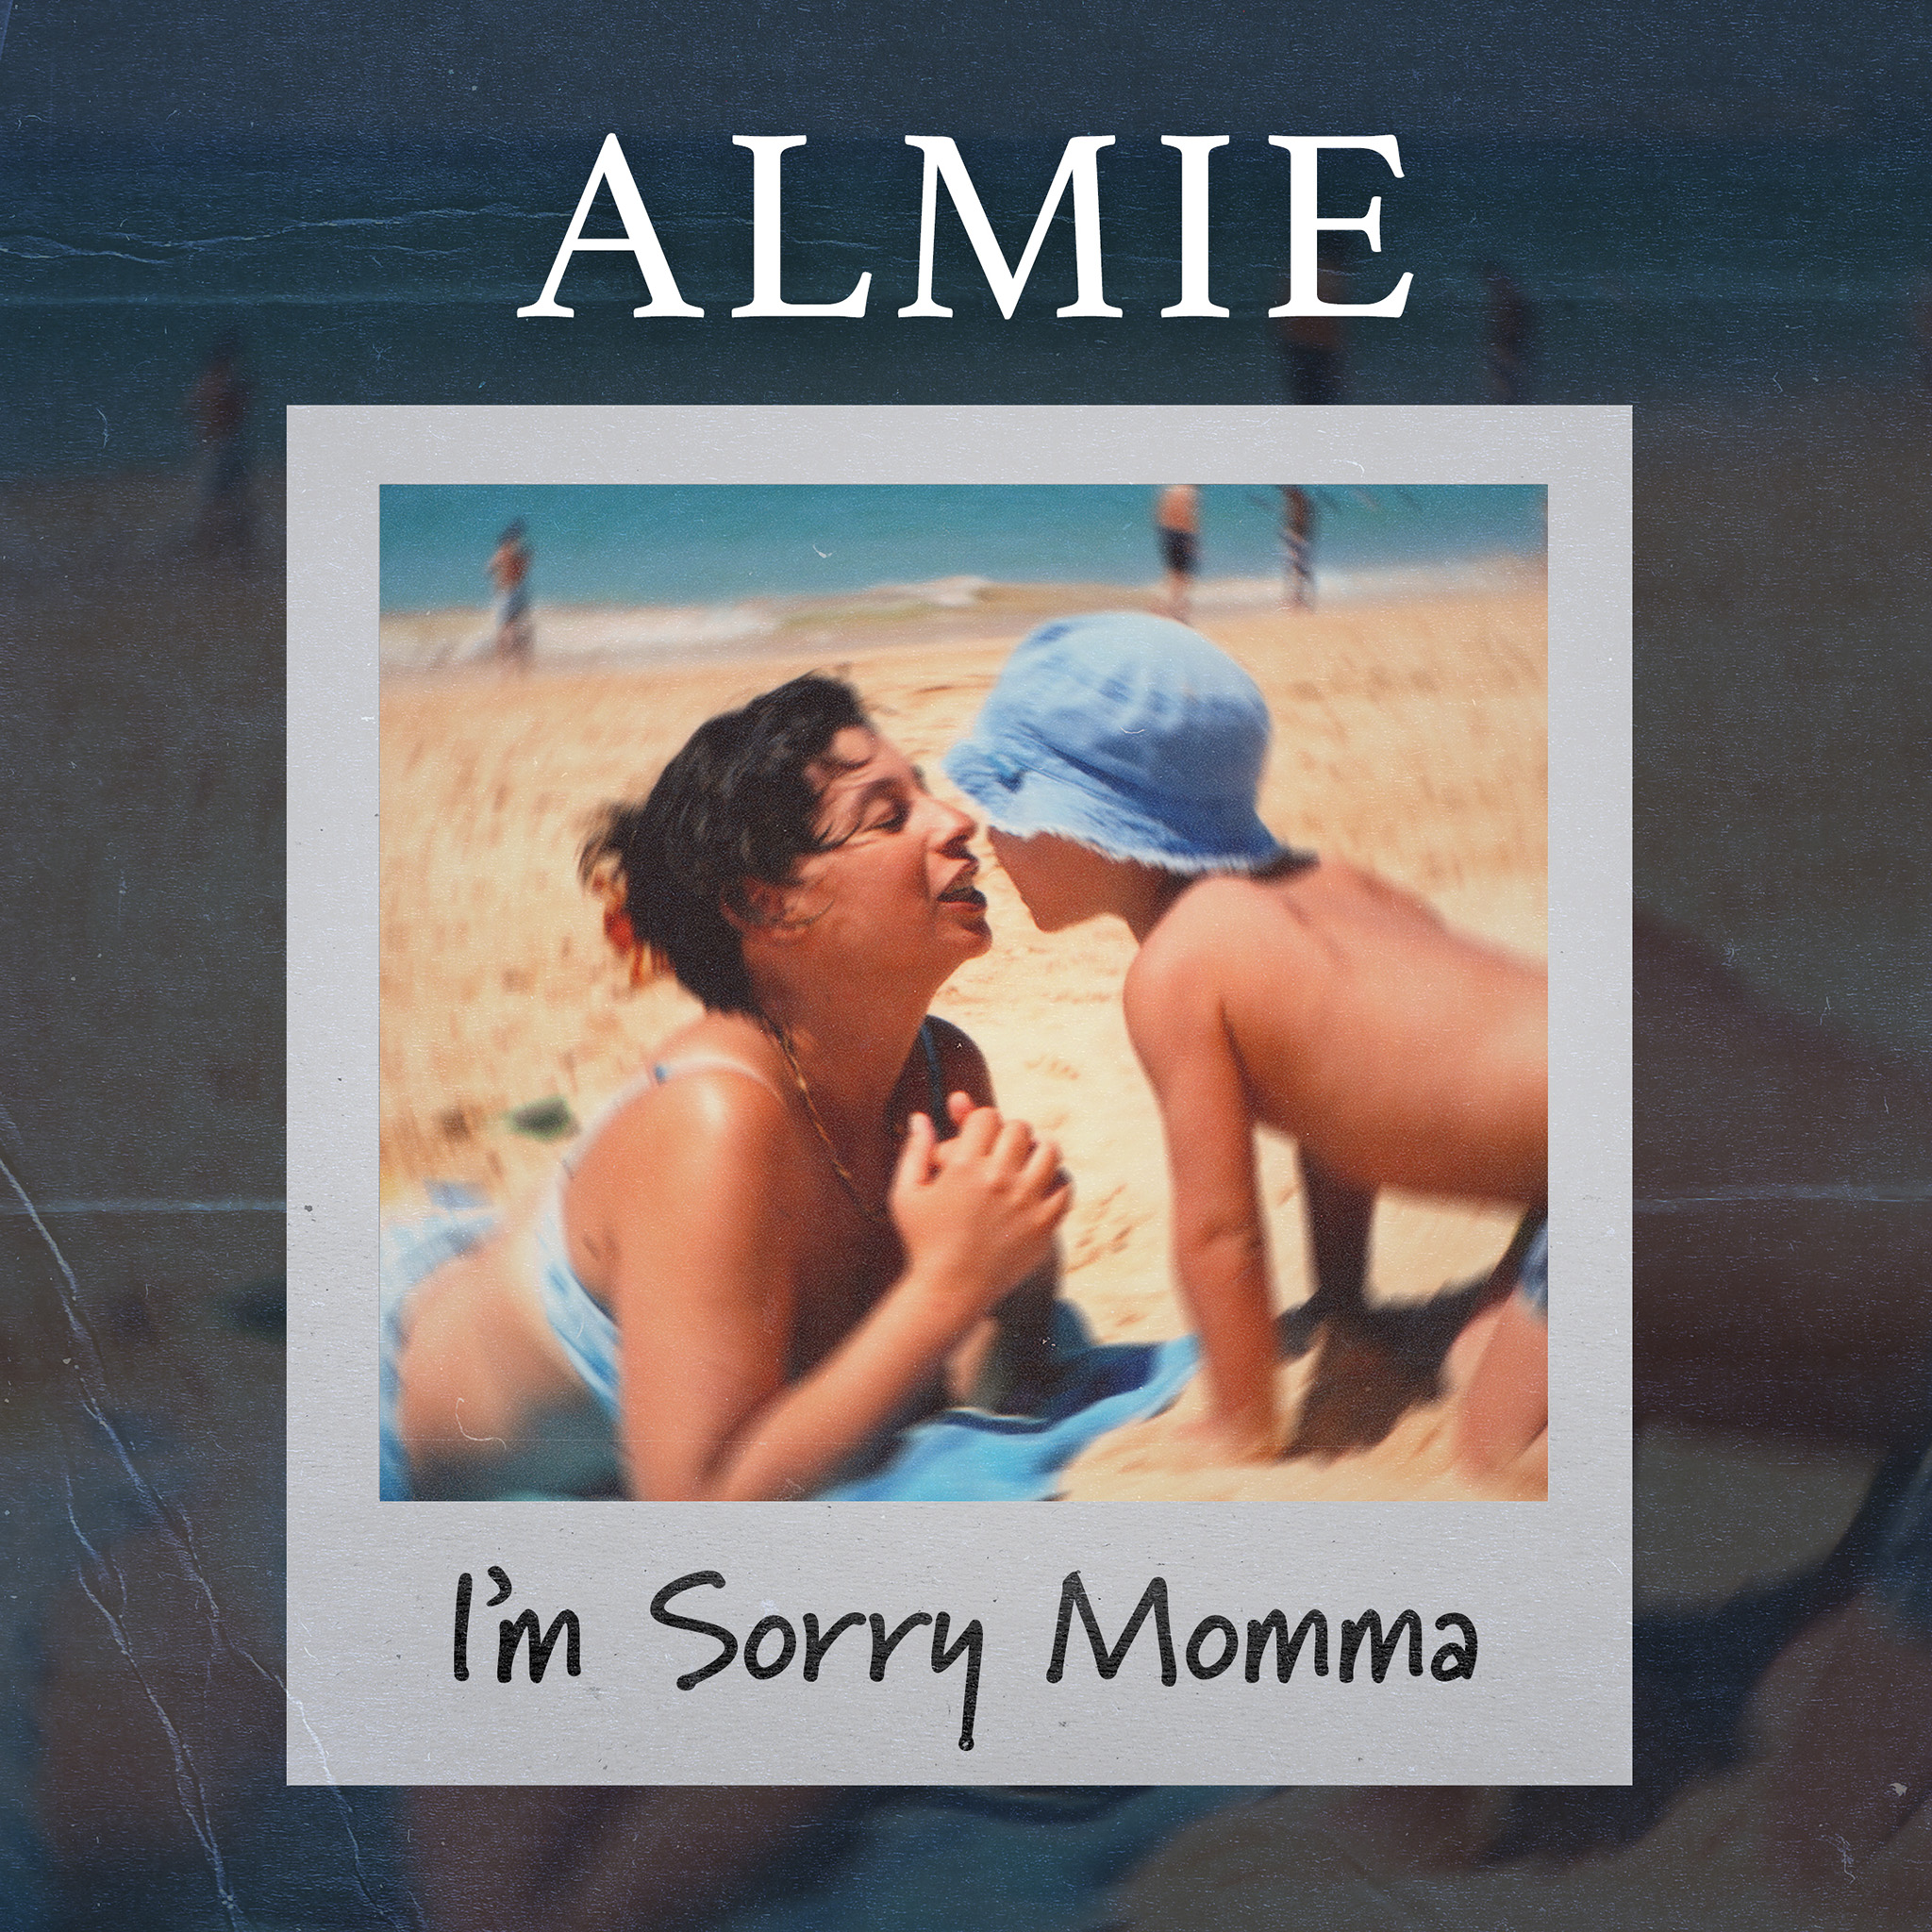 Almie - I'm Sorry Momma